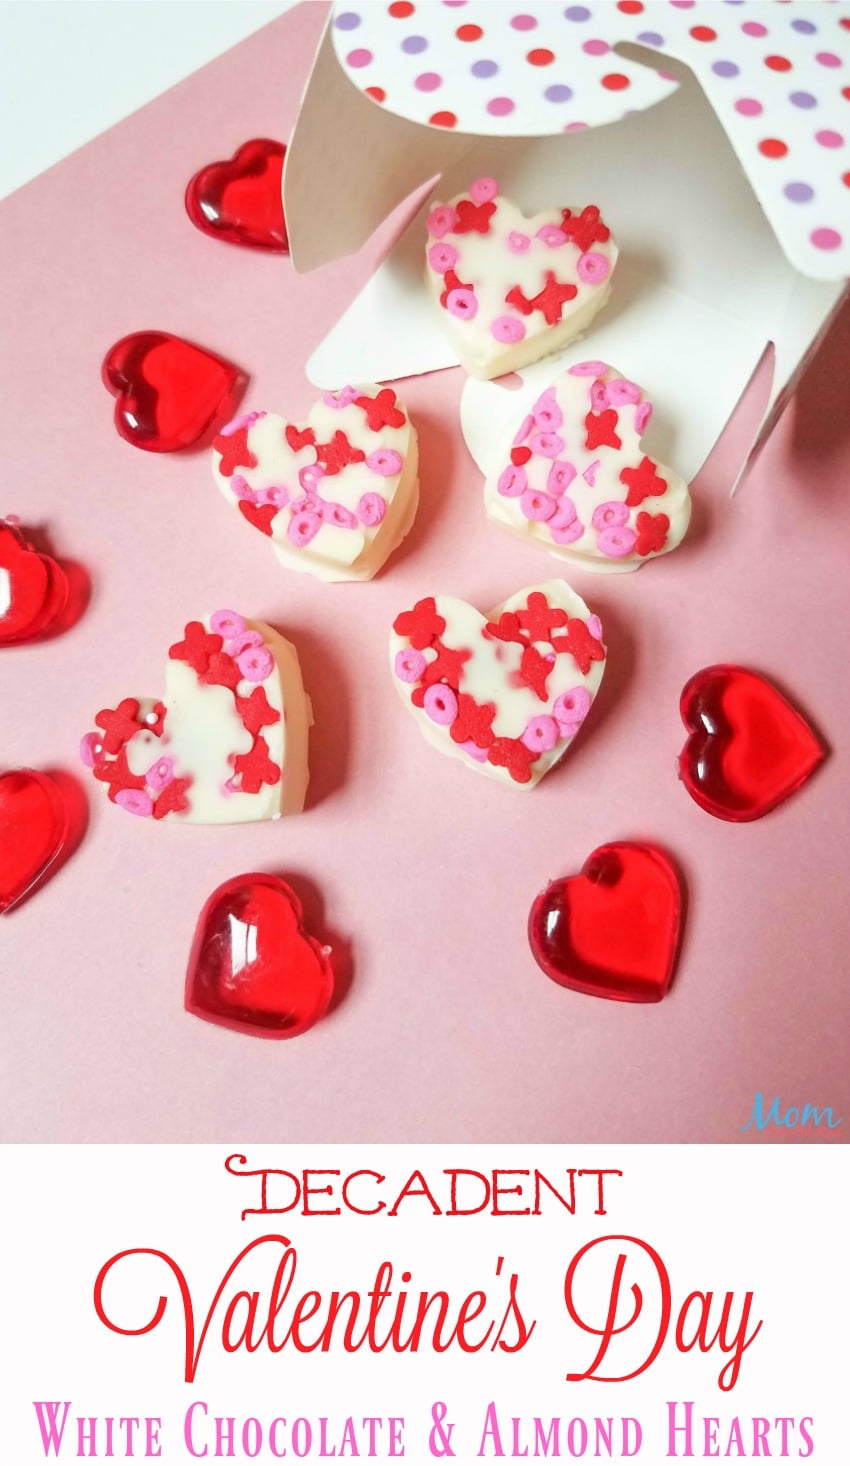 Decadent Valentine's Day White Chocolate Almond Hearts #sweet2019 #sweets #hearts #candy #recipe #valentinesday